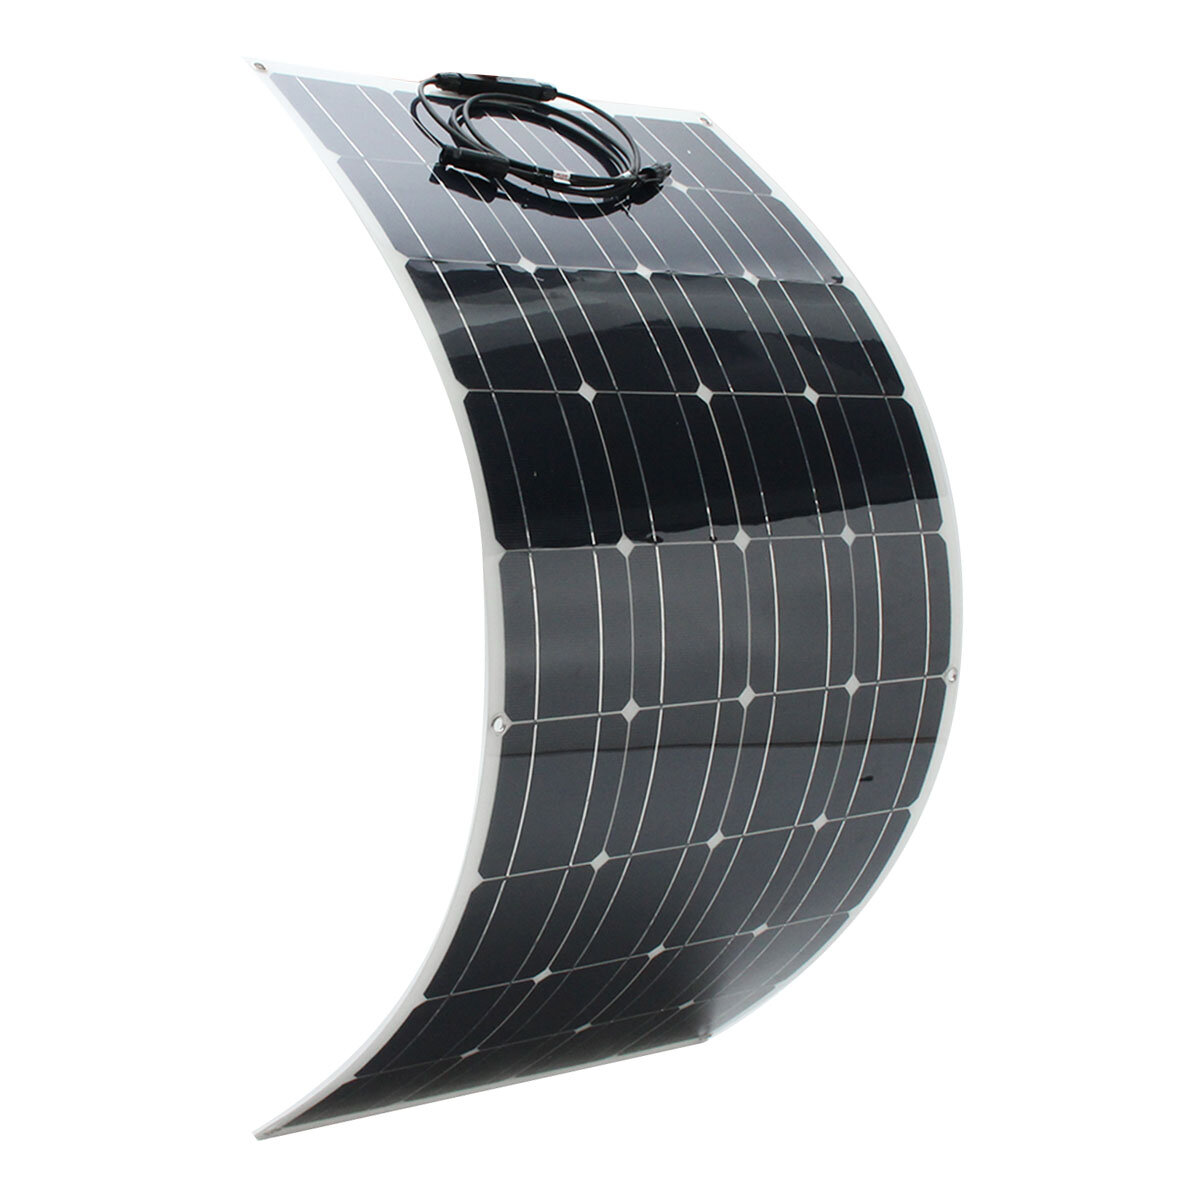 

Elfeland® SP-39 120W 1180*540mm Semi-Flexible Solar Panel With 1.5m Cable Front Junction Box